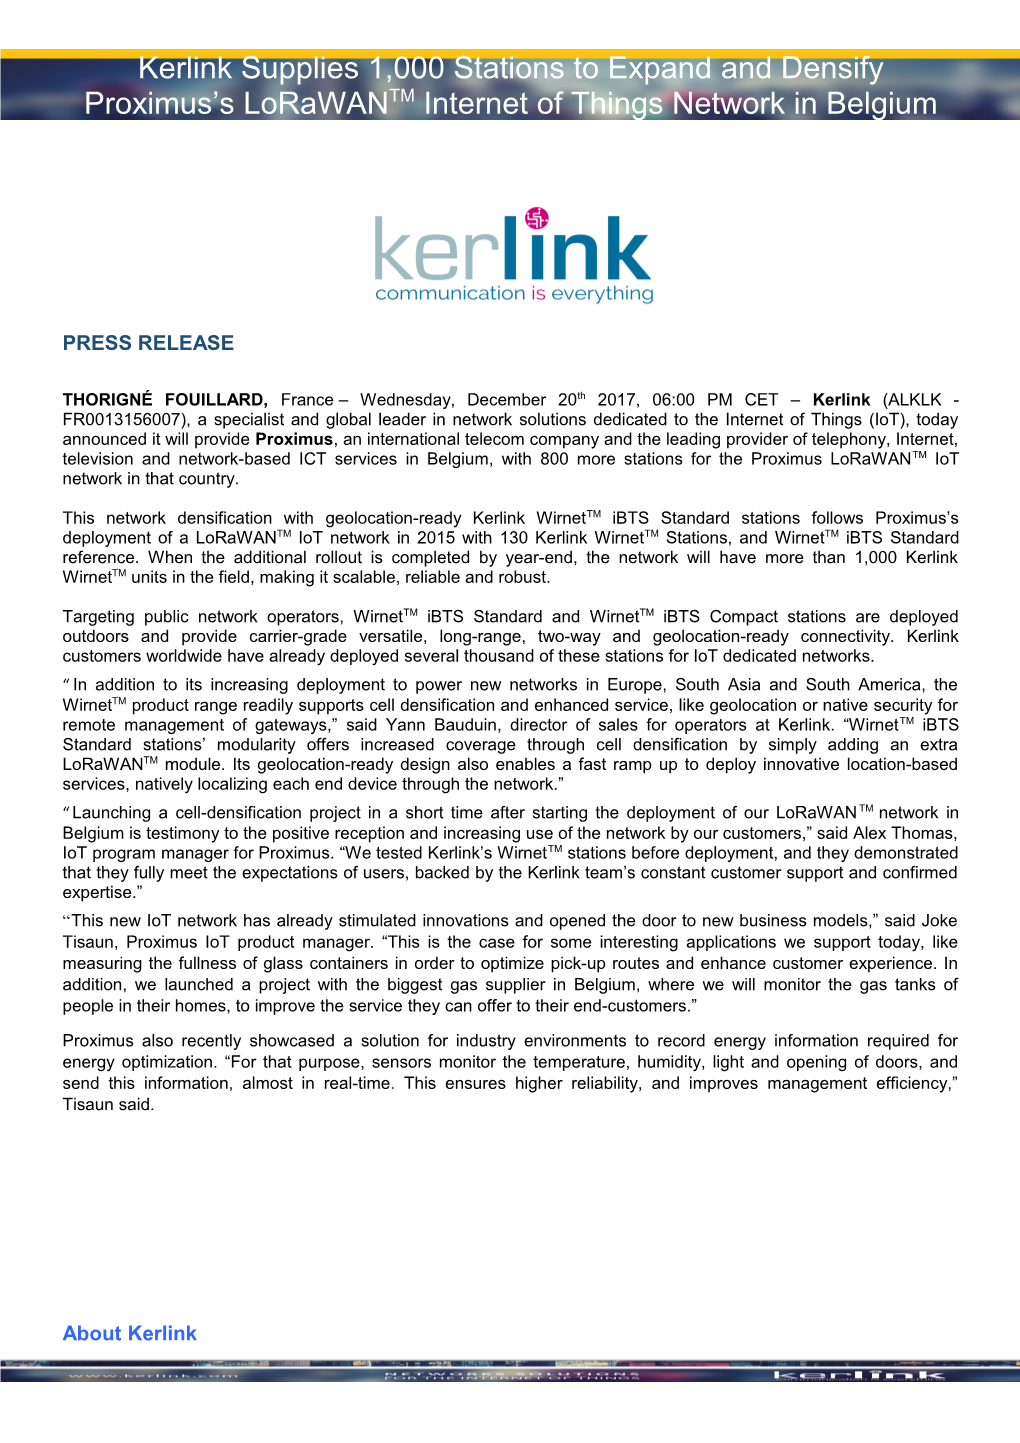 Kerlink Supplies 1,000 Stations to Expand and Densify Proximus S Lorawantm Internet Of